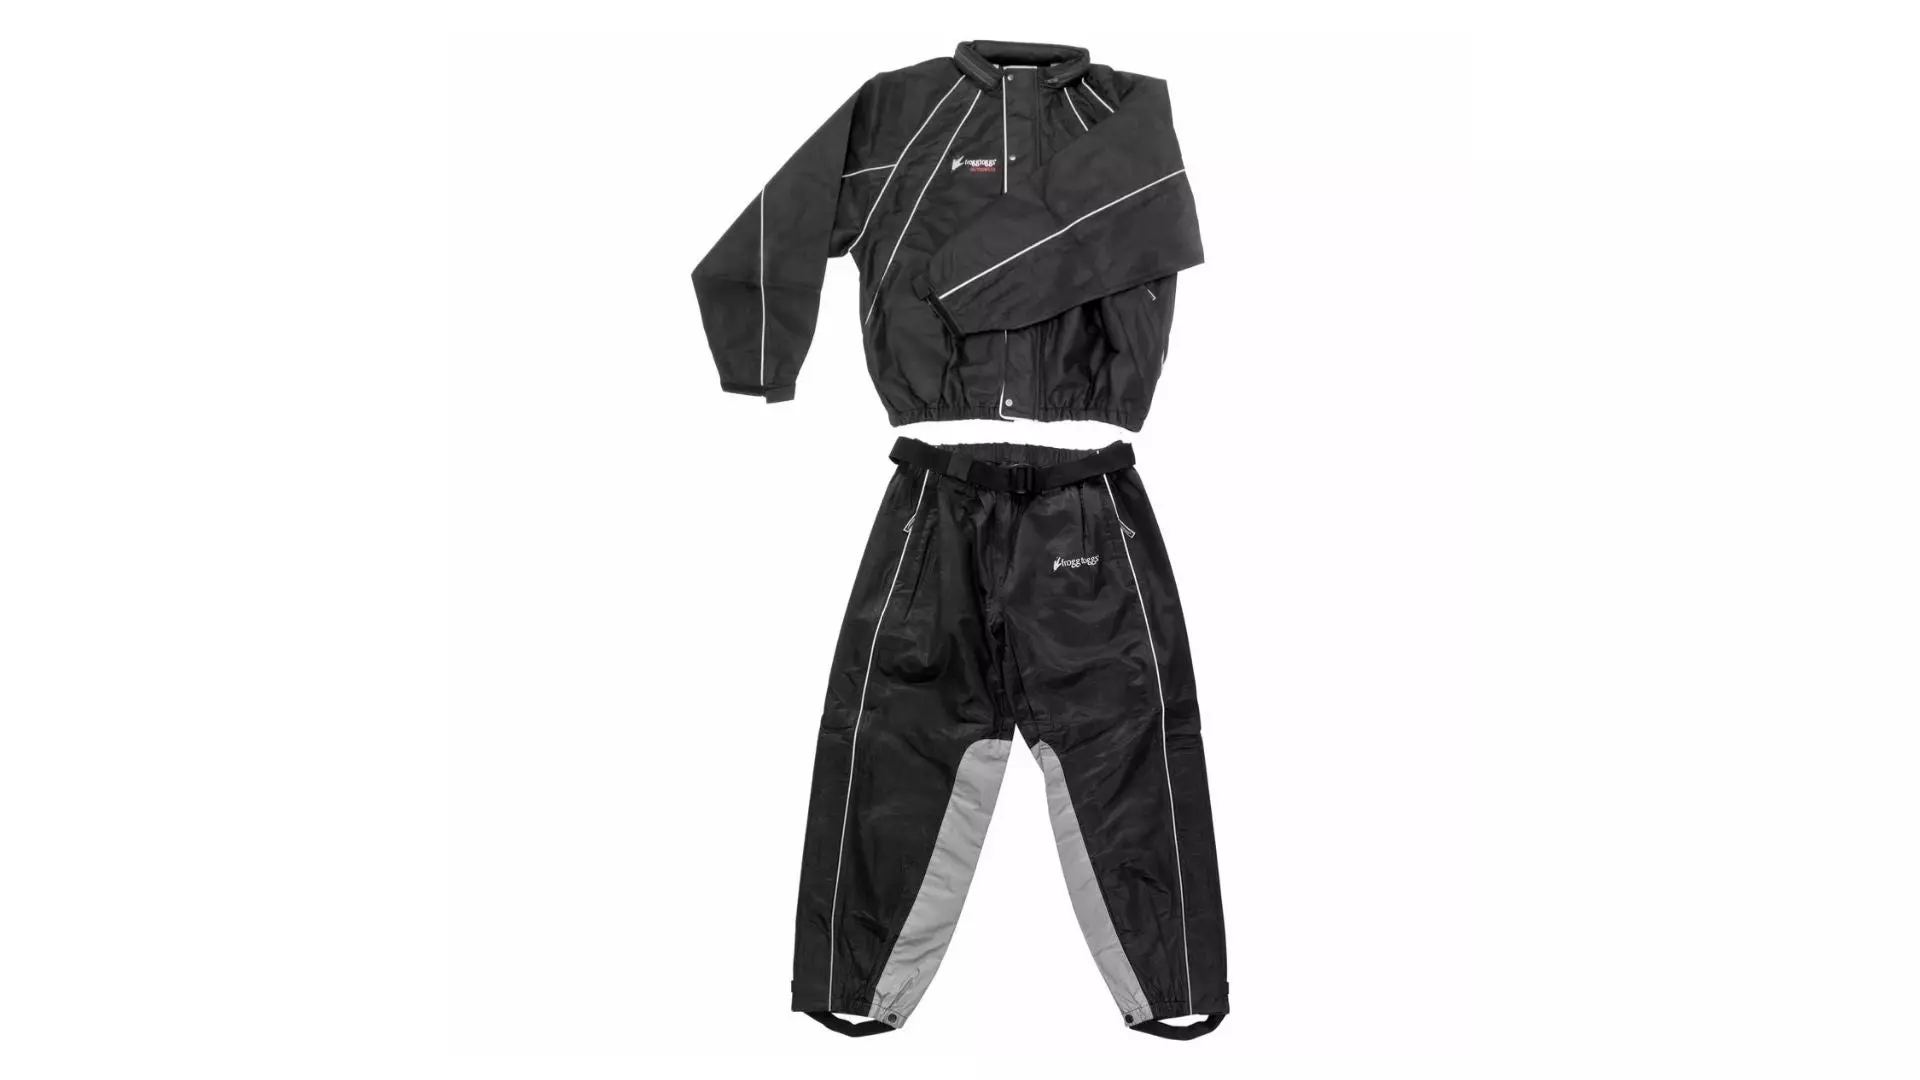 Frogg Toggs Hogg Togg Black Rain Suit with Heat Resistant Leg Liners